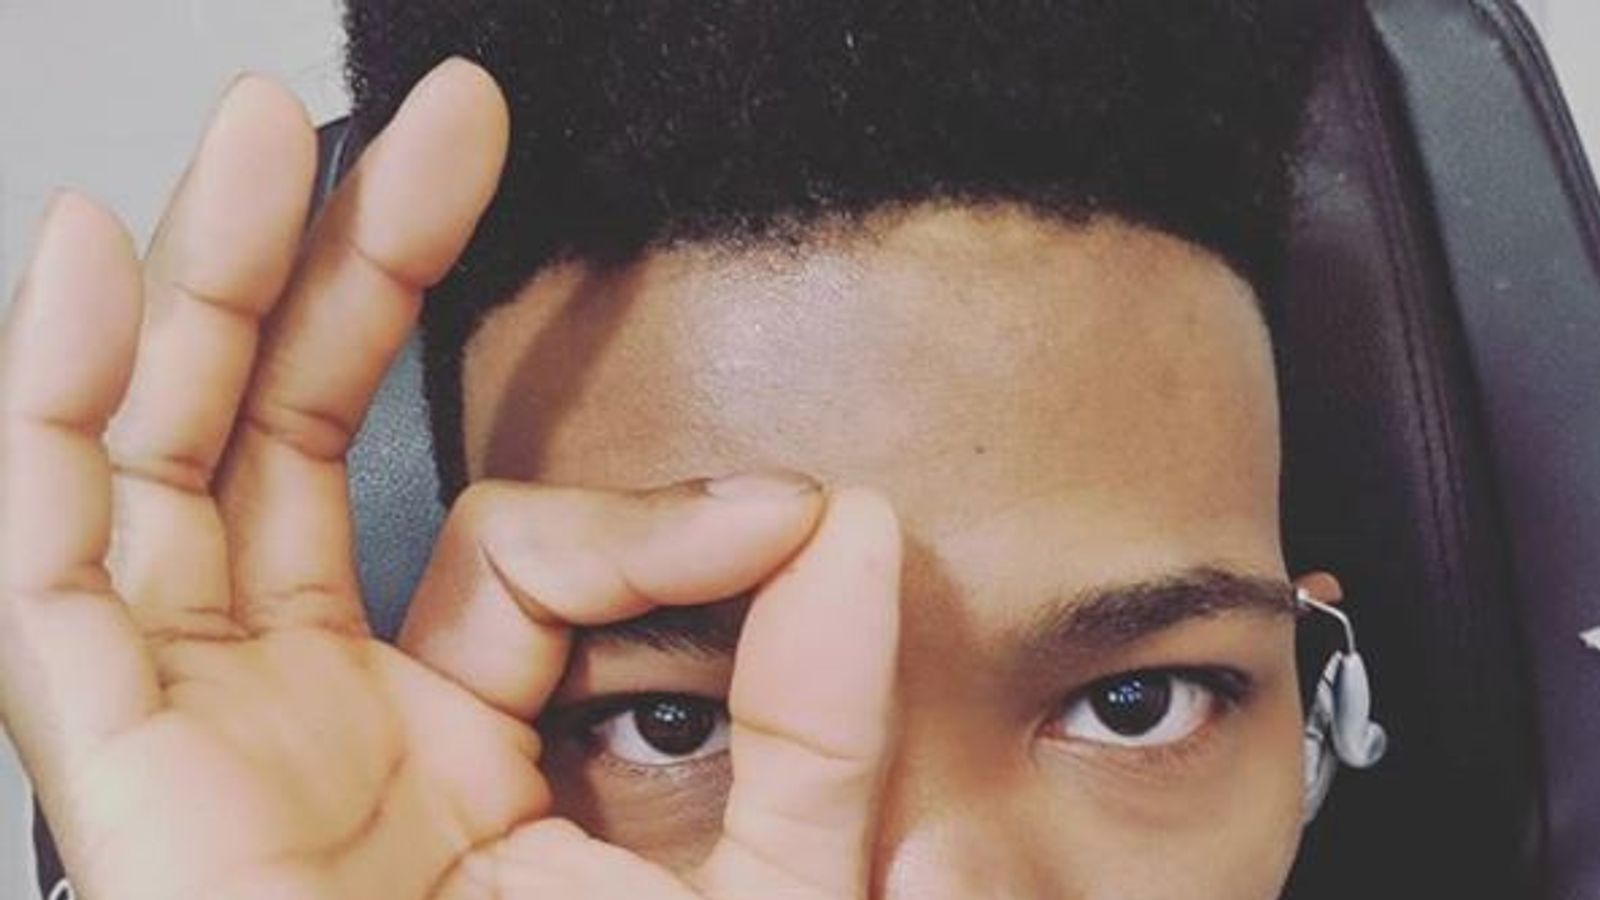 'It was a fun life': YouTube star Etika found dead after final video